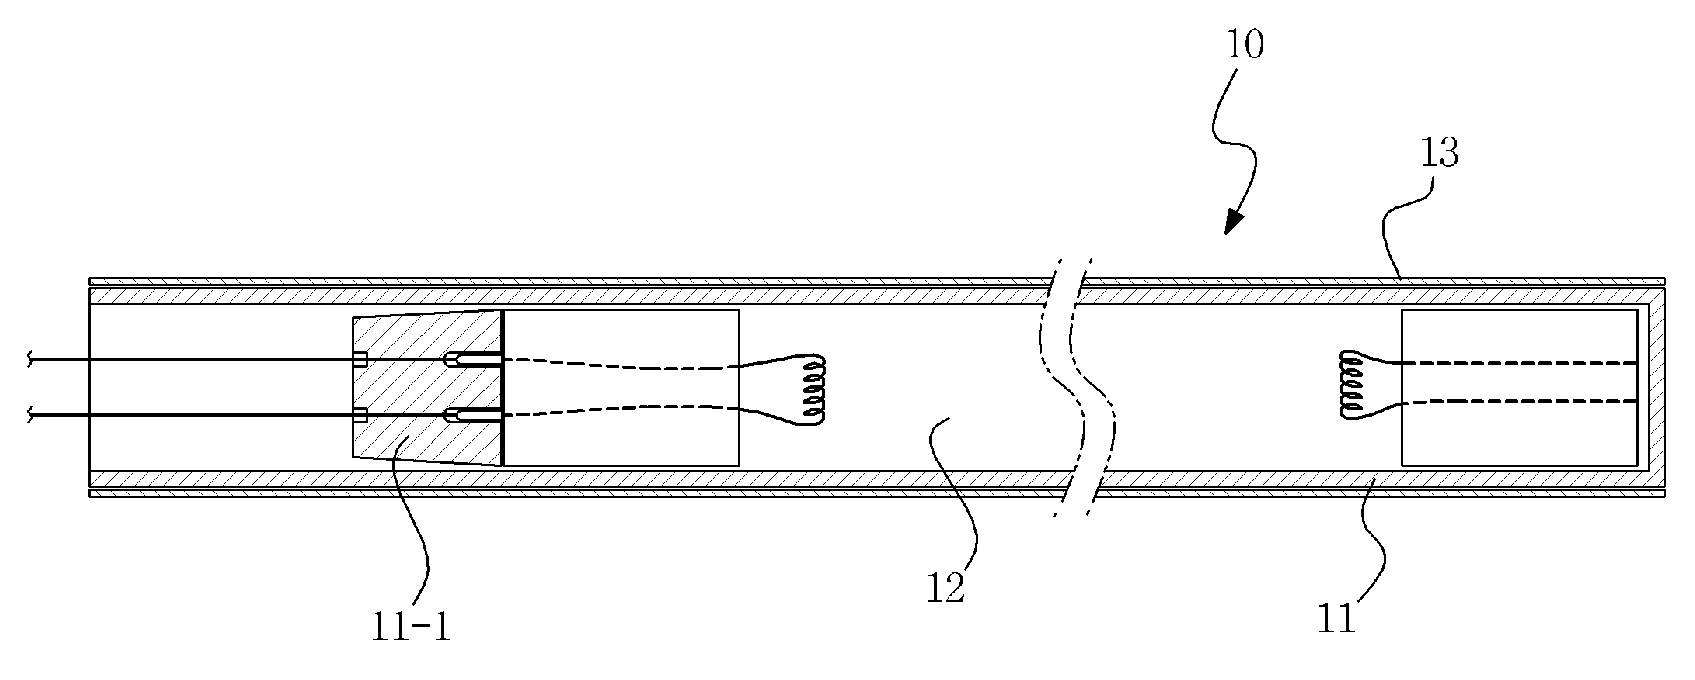 Apparatus and method for disinfecting food using photo-catalytic reaction of titanium dioxide and ultraviolet rays